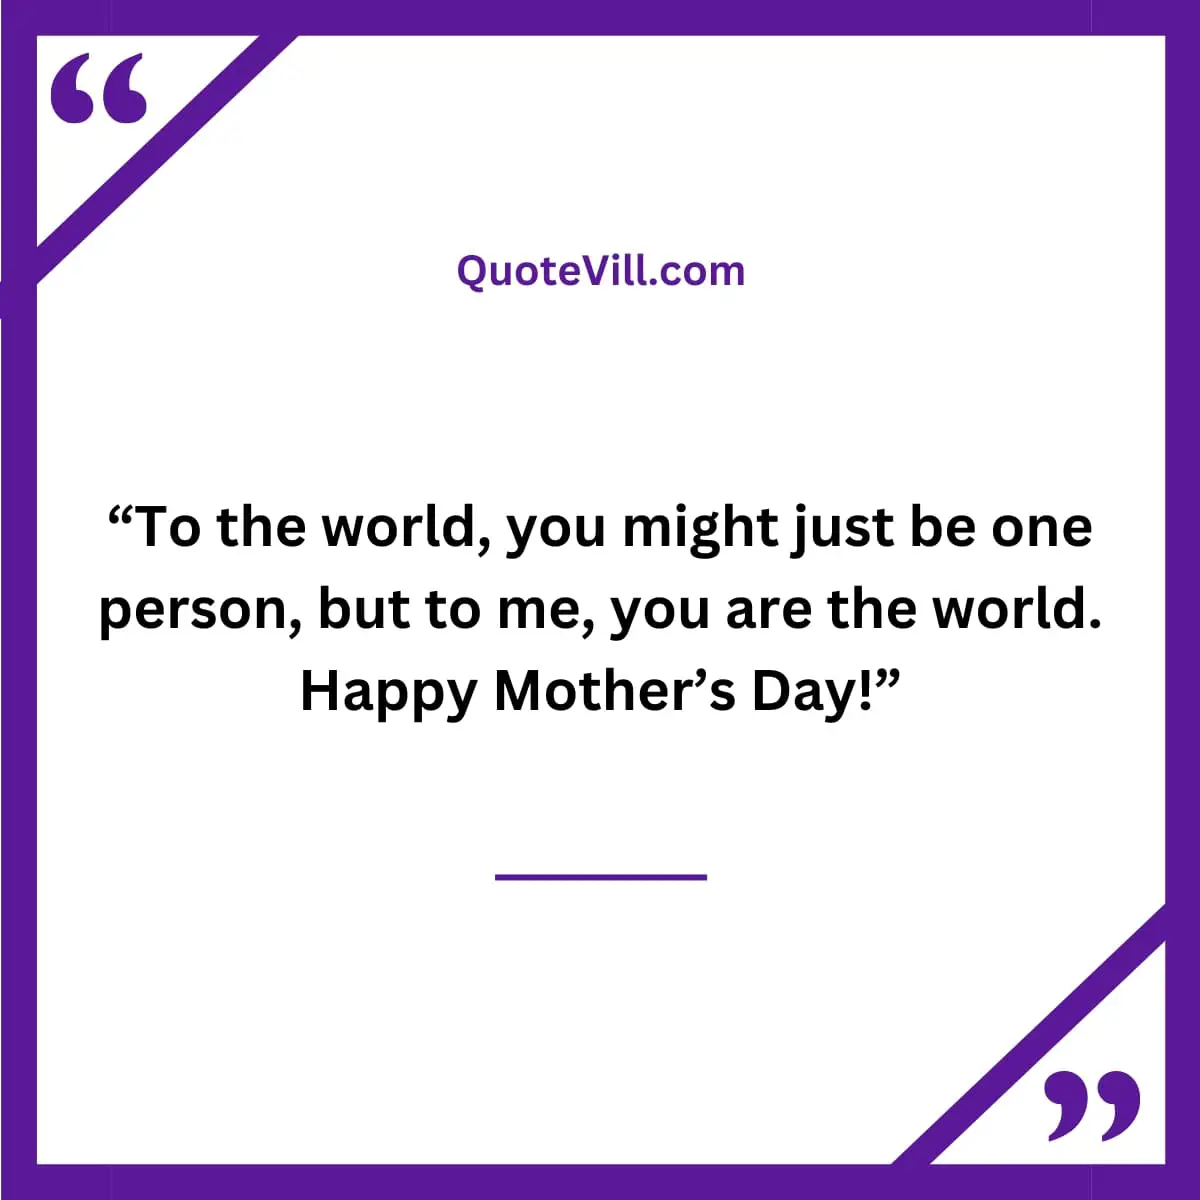 Daughter's Quotes For Mother's Day